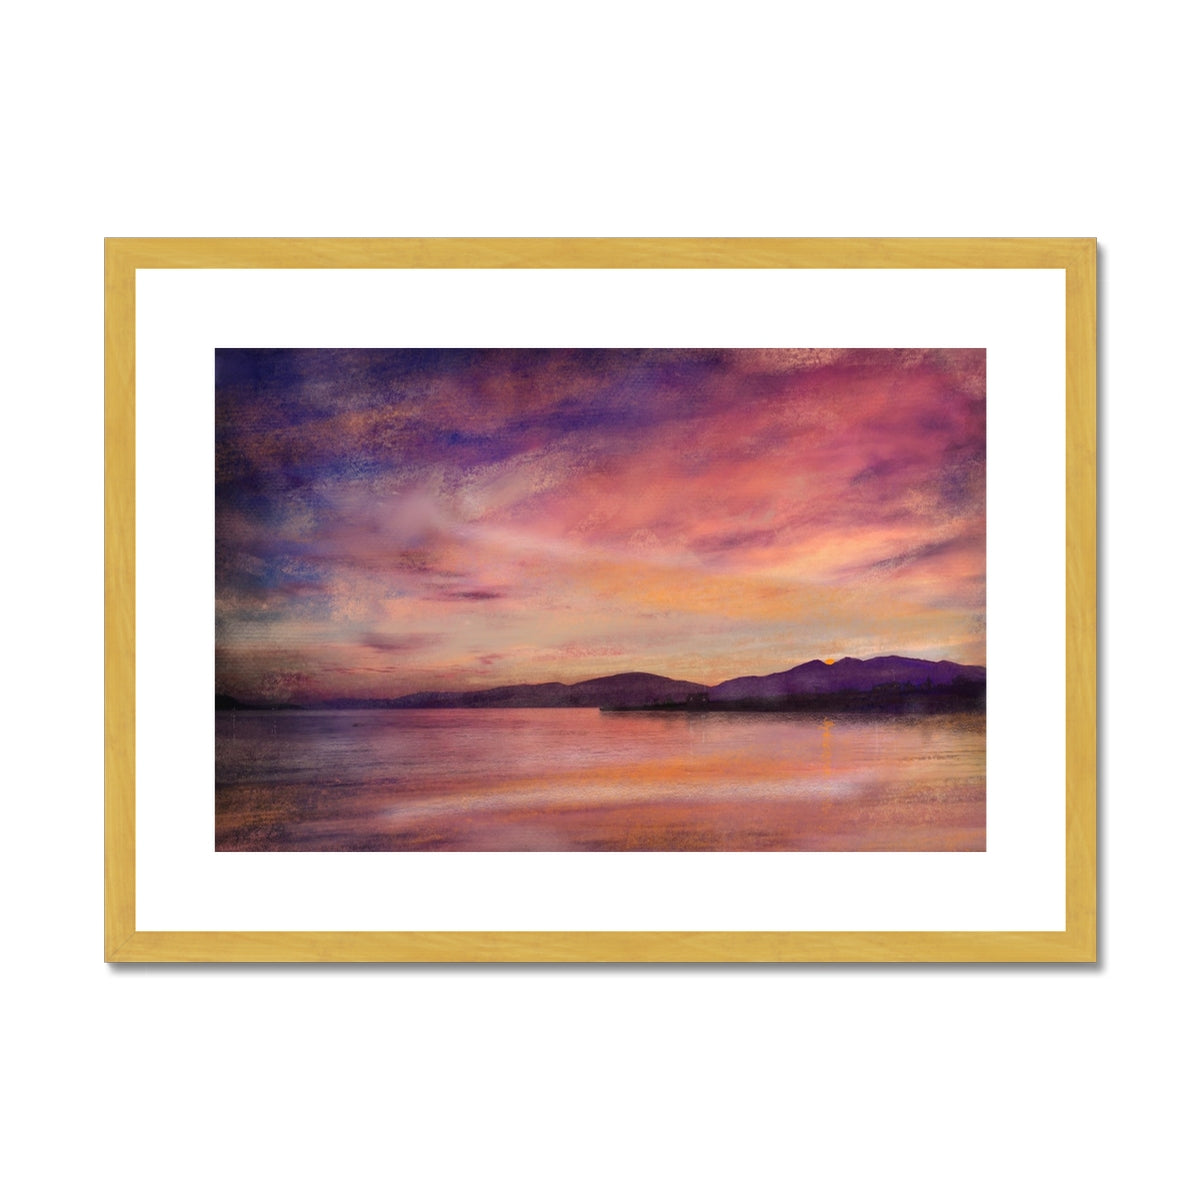 Loch Linnhe Dusk Painting | Antique Framed & Mounted Prints From Scotland-Antique Framed & Mounted Prints-Scottish Lochs & Mountains Art Gallery-A2 Landscape-Gold Frame-Paintings, Prints, Homeware, Art Gifts From Scotland By Scottish Artist Kevin Hunter